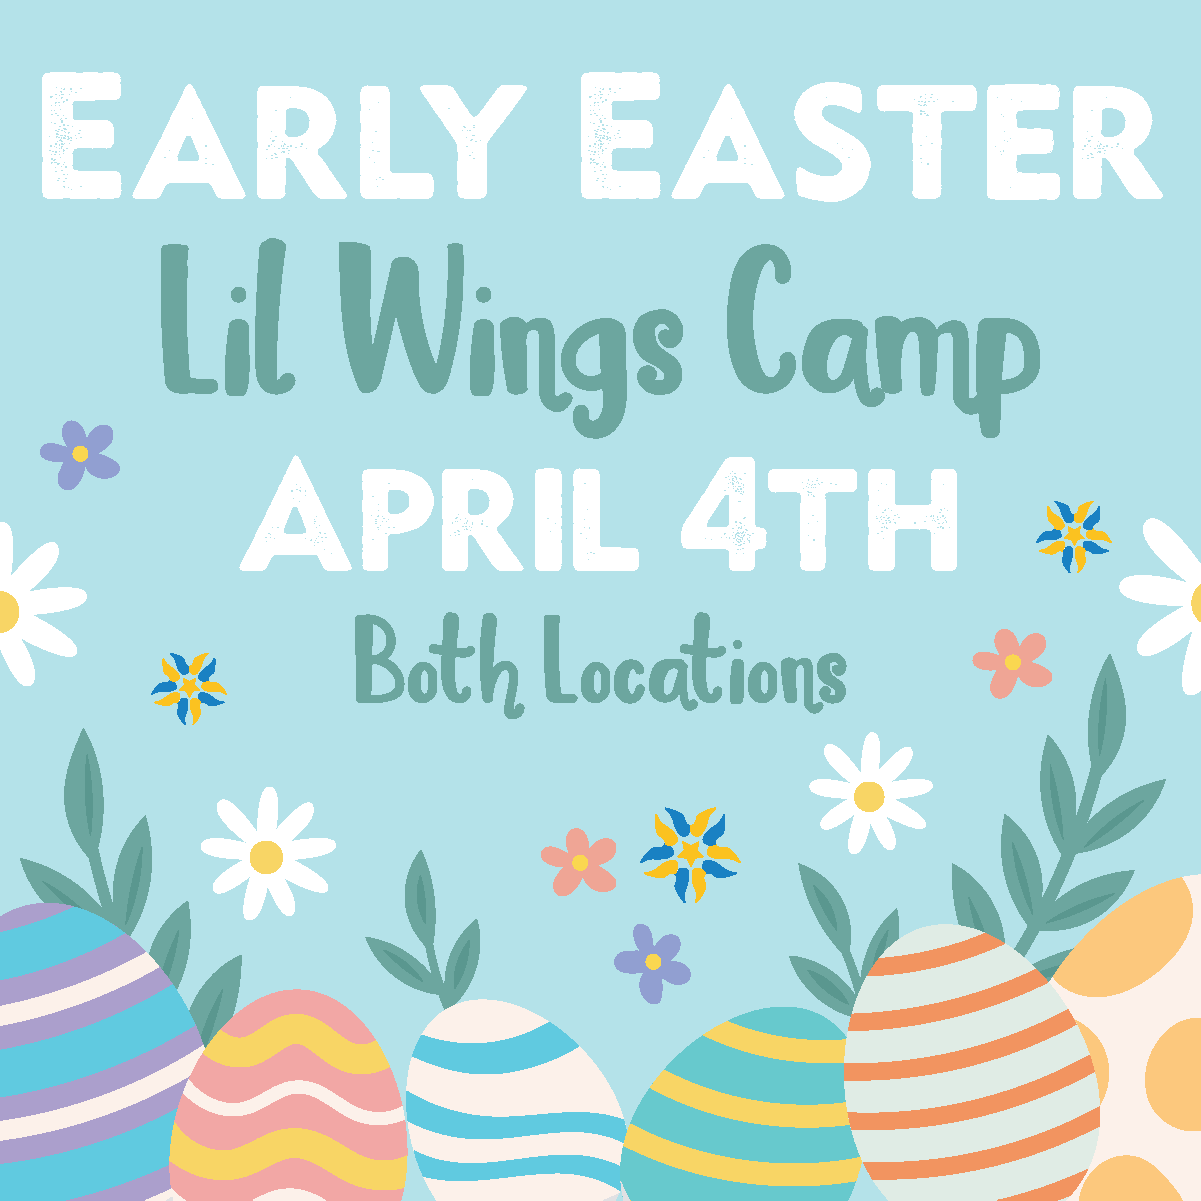 Early Easter Lil Wings Camp